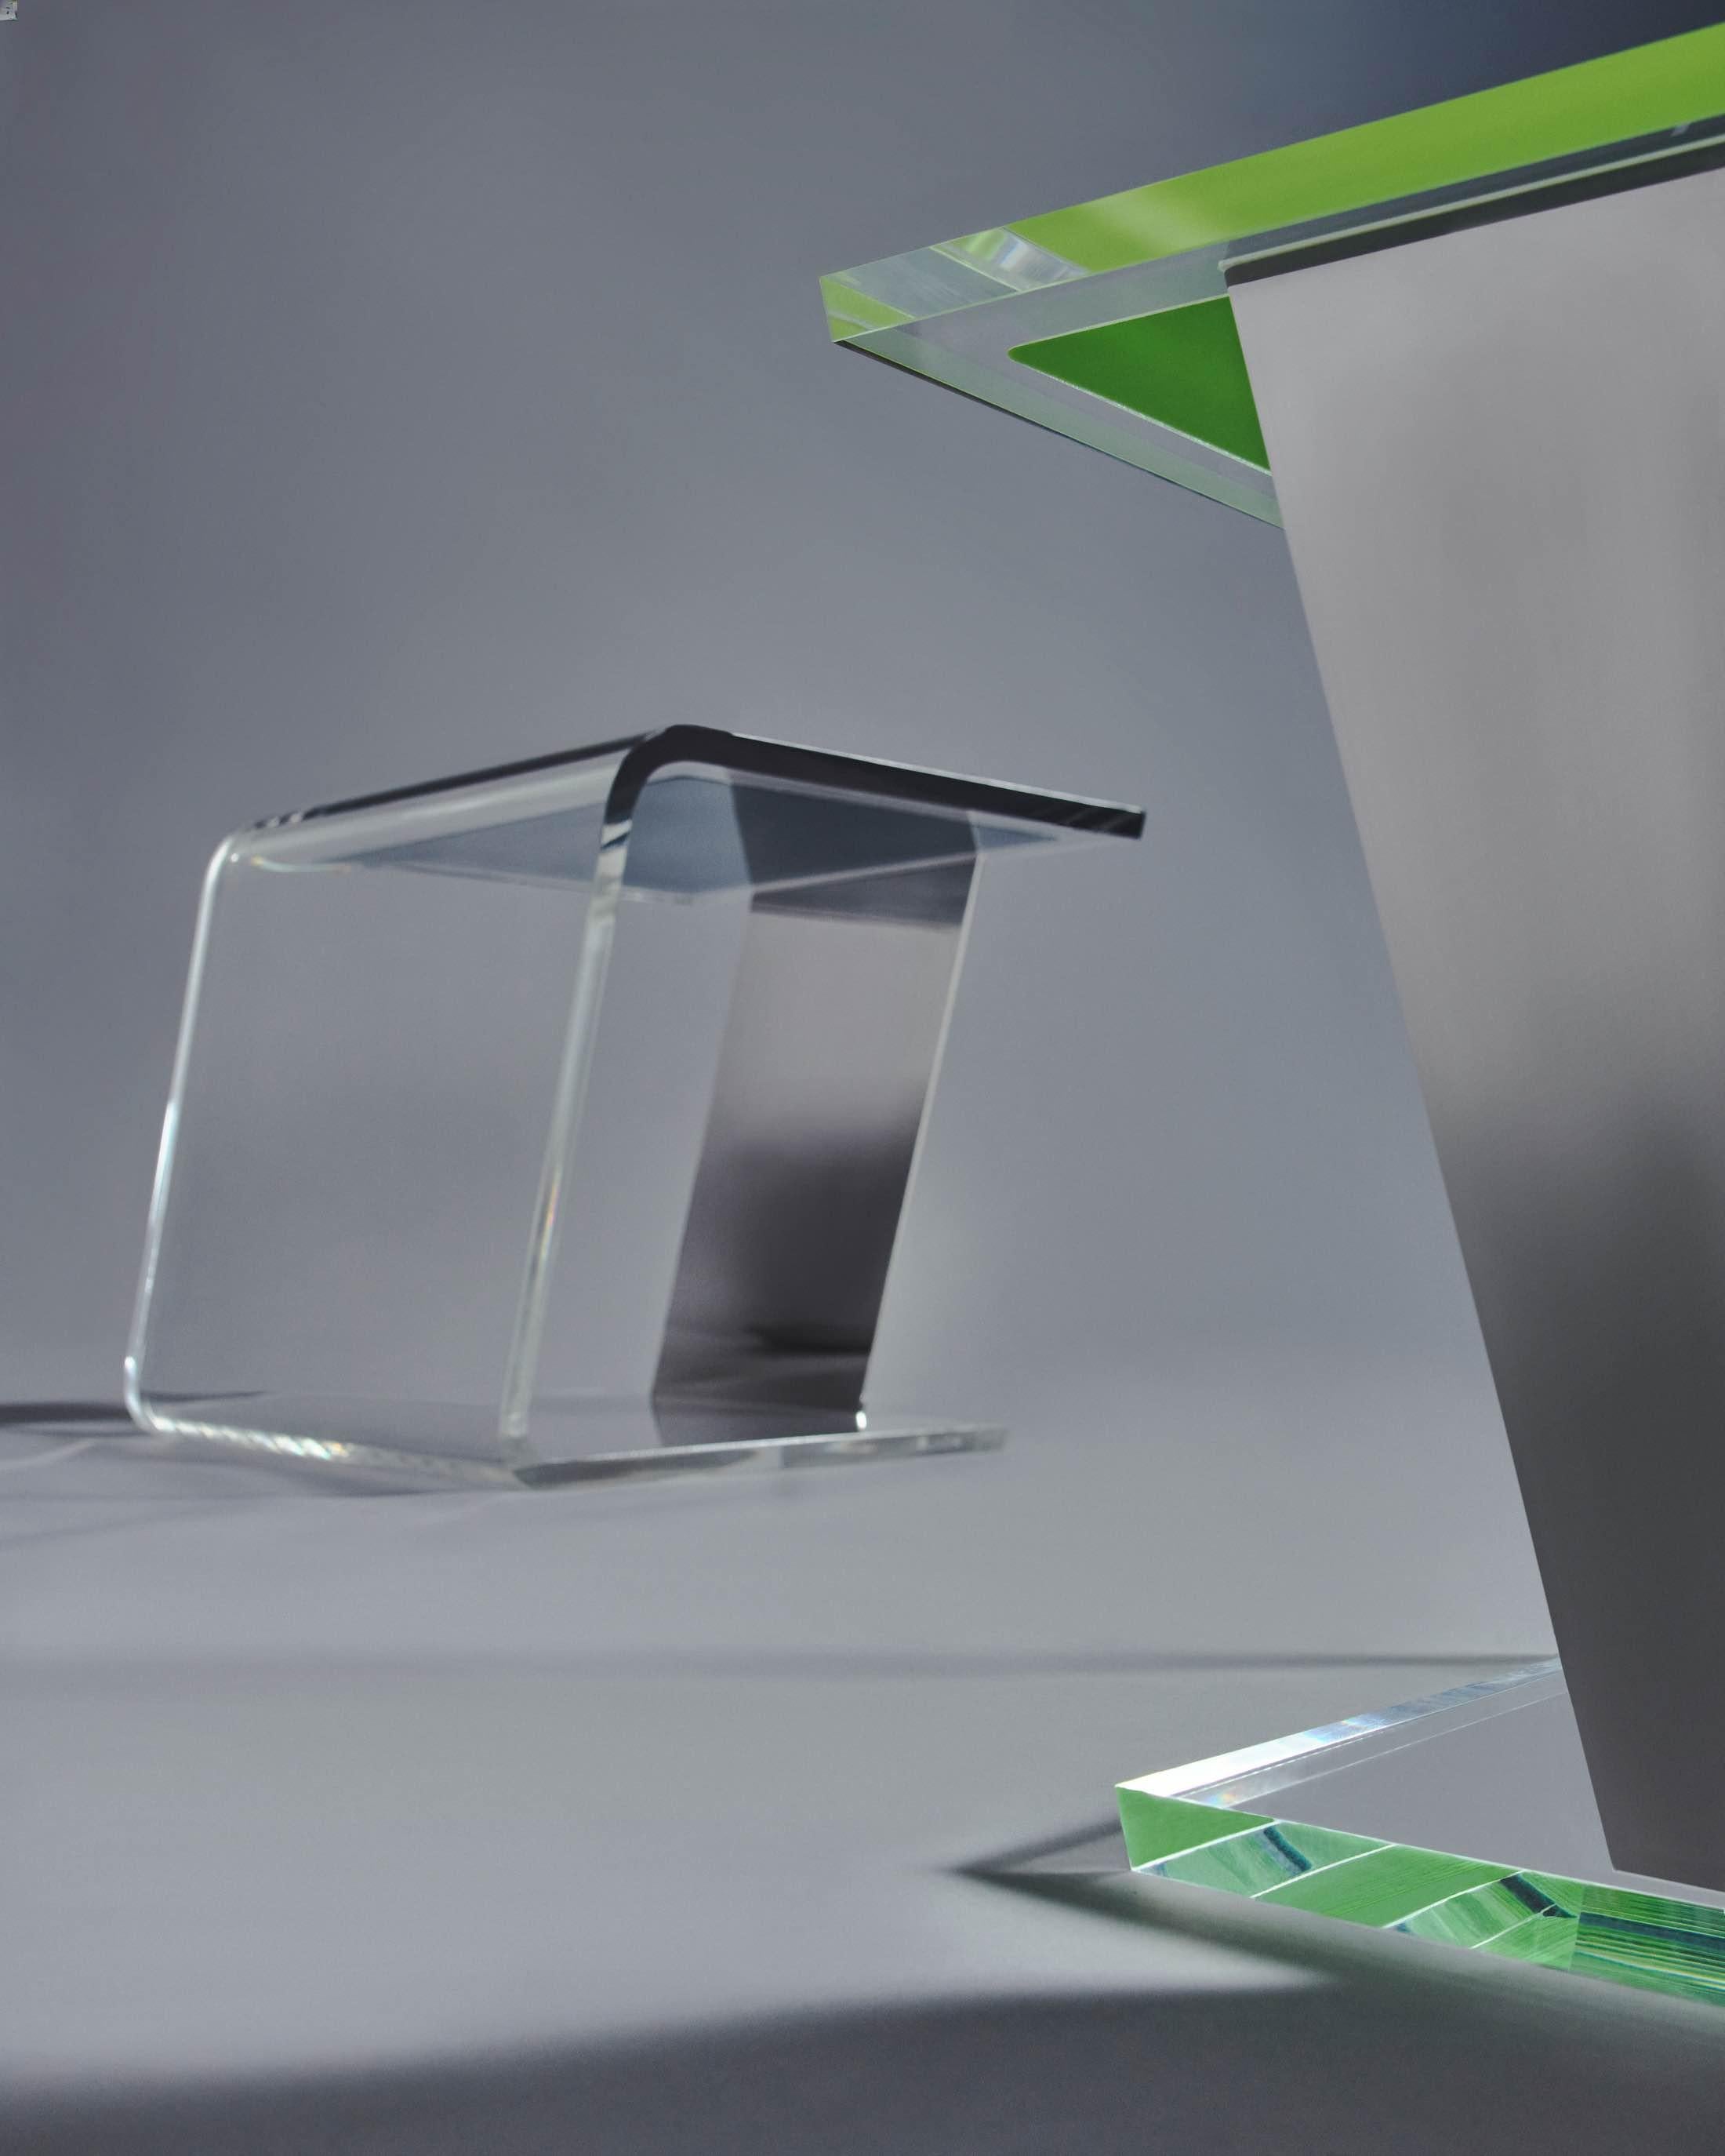 Crafted with a delicate balance of materials, Neo S embodies a sense of harmonious coexistence. The sleek design of the stool showcases a transparent acrylic glass shell that allows light to flow through, lending a weightlessness to the